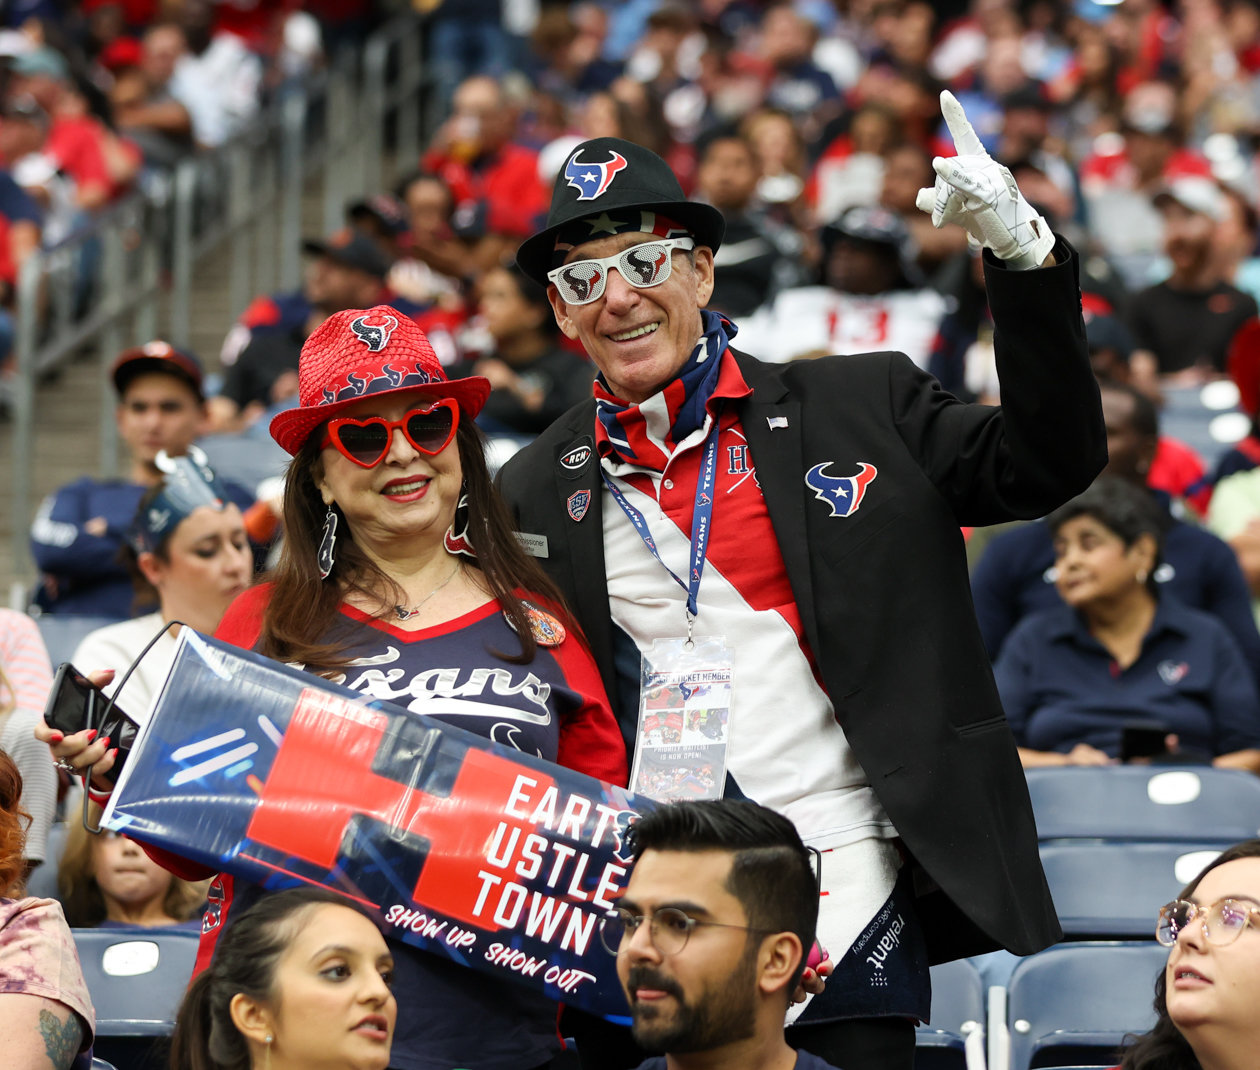 Texans fans during an NFL game between the Texans and the Titans on Oct. 30, 2022 in Houston.